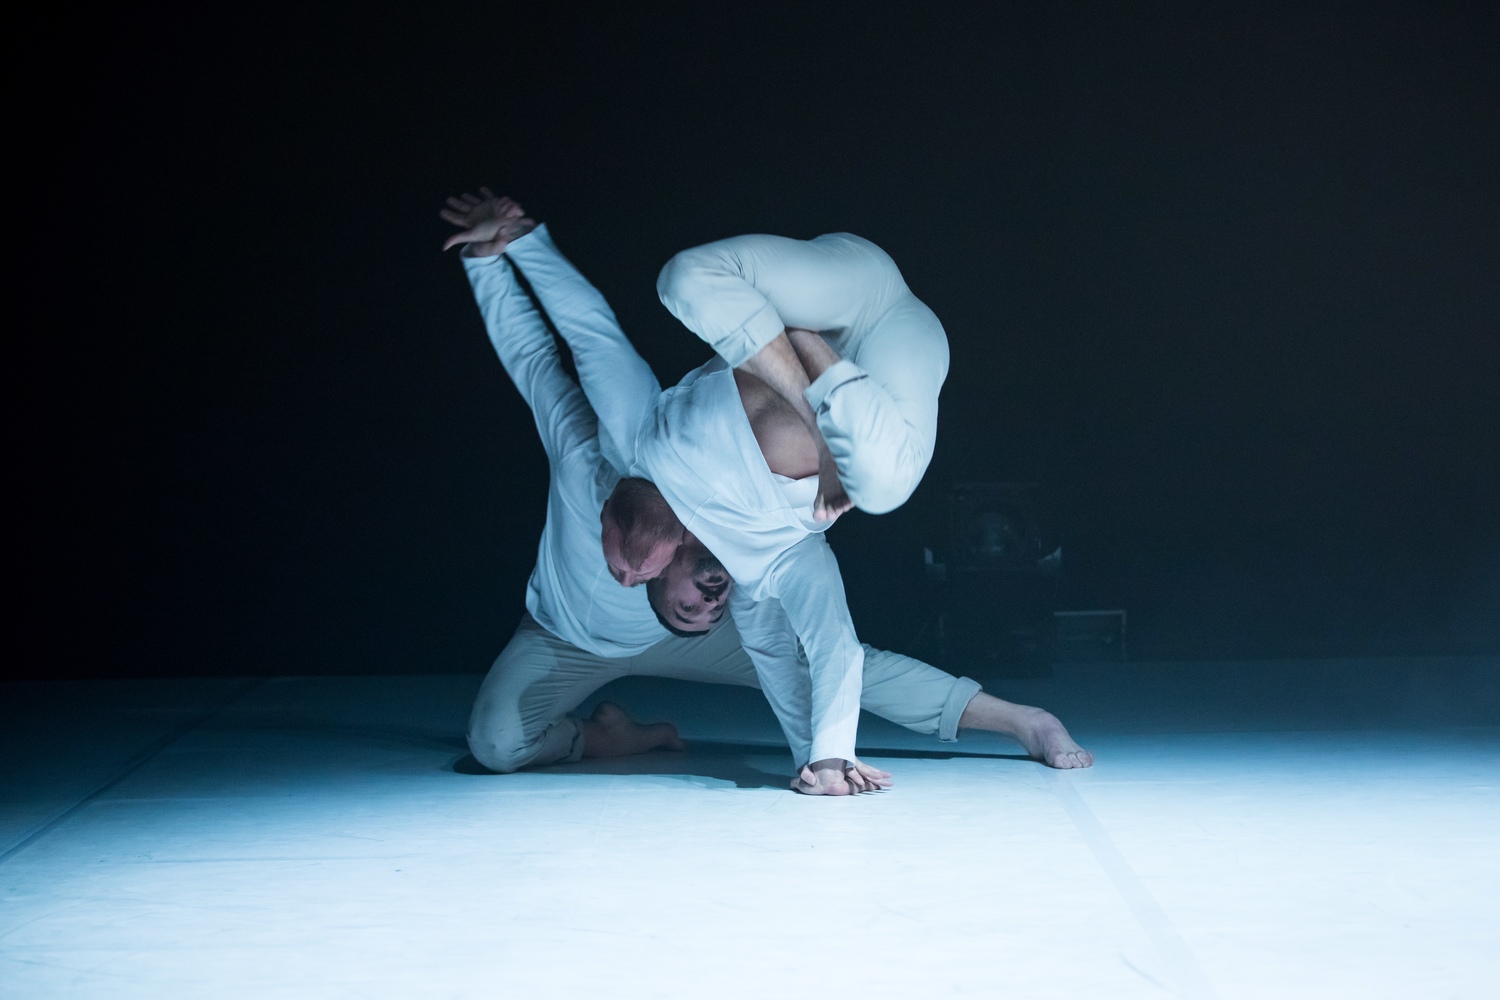 A FUSION OF CONTORTION, HIP-HOP, THREADING, BREAKDANCING AND CONTEMPORARY DANCE. Dance St. Louis kicks off its 53rd season with an arousing presentation of Wewolf, the LA-based company of award-winning international artists James Gregg and RubberLegz (aka Rauf Yasit). 